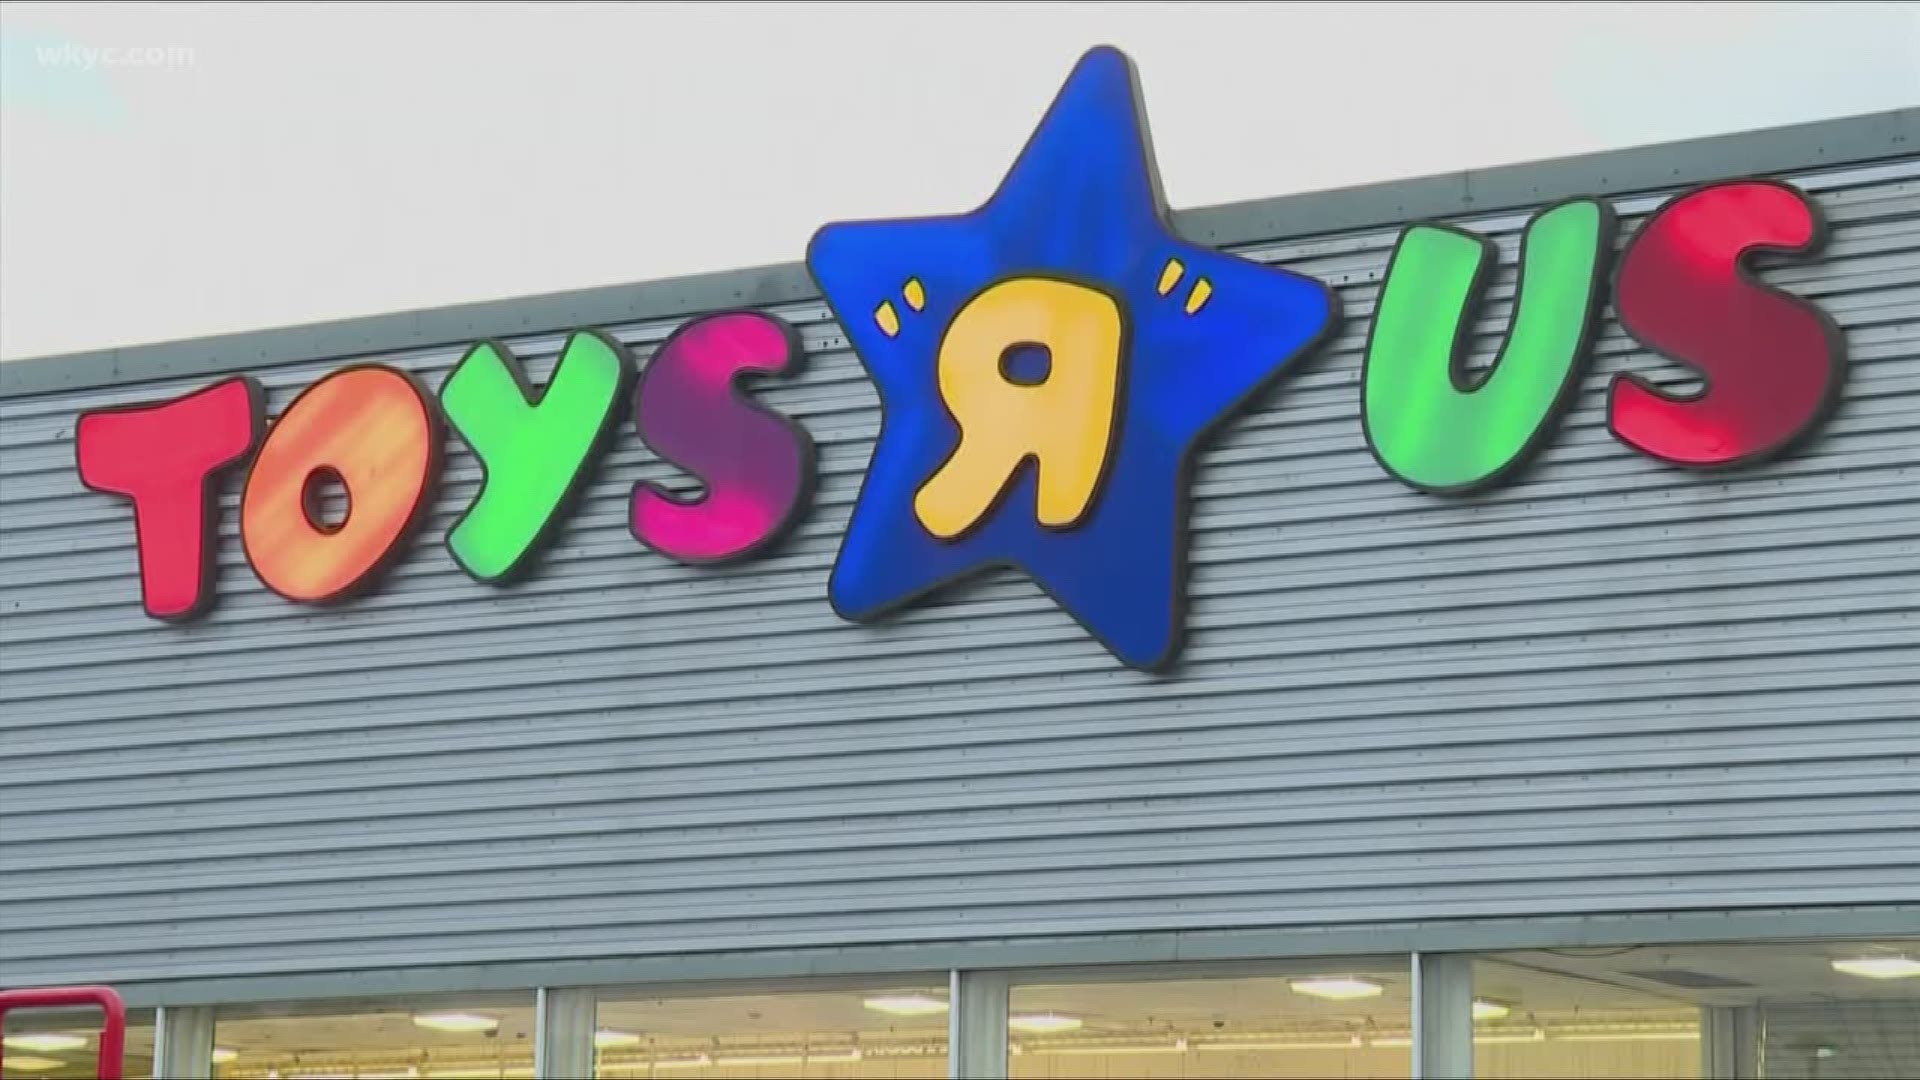 March 22, 2018: The sale comes as Toys R Us prepares to close all its stores.